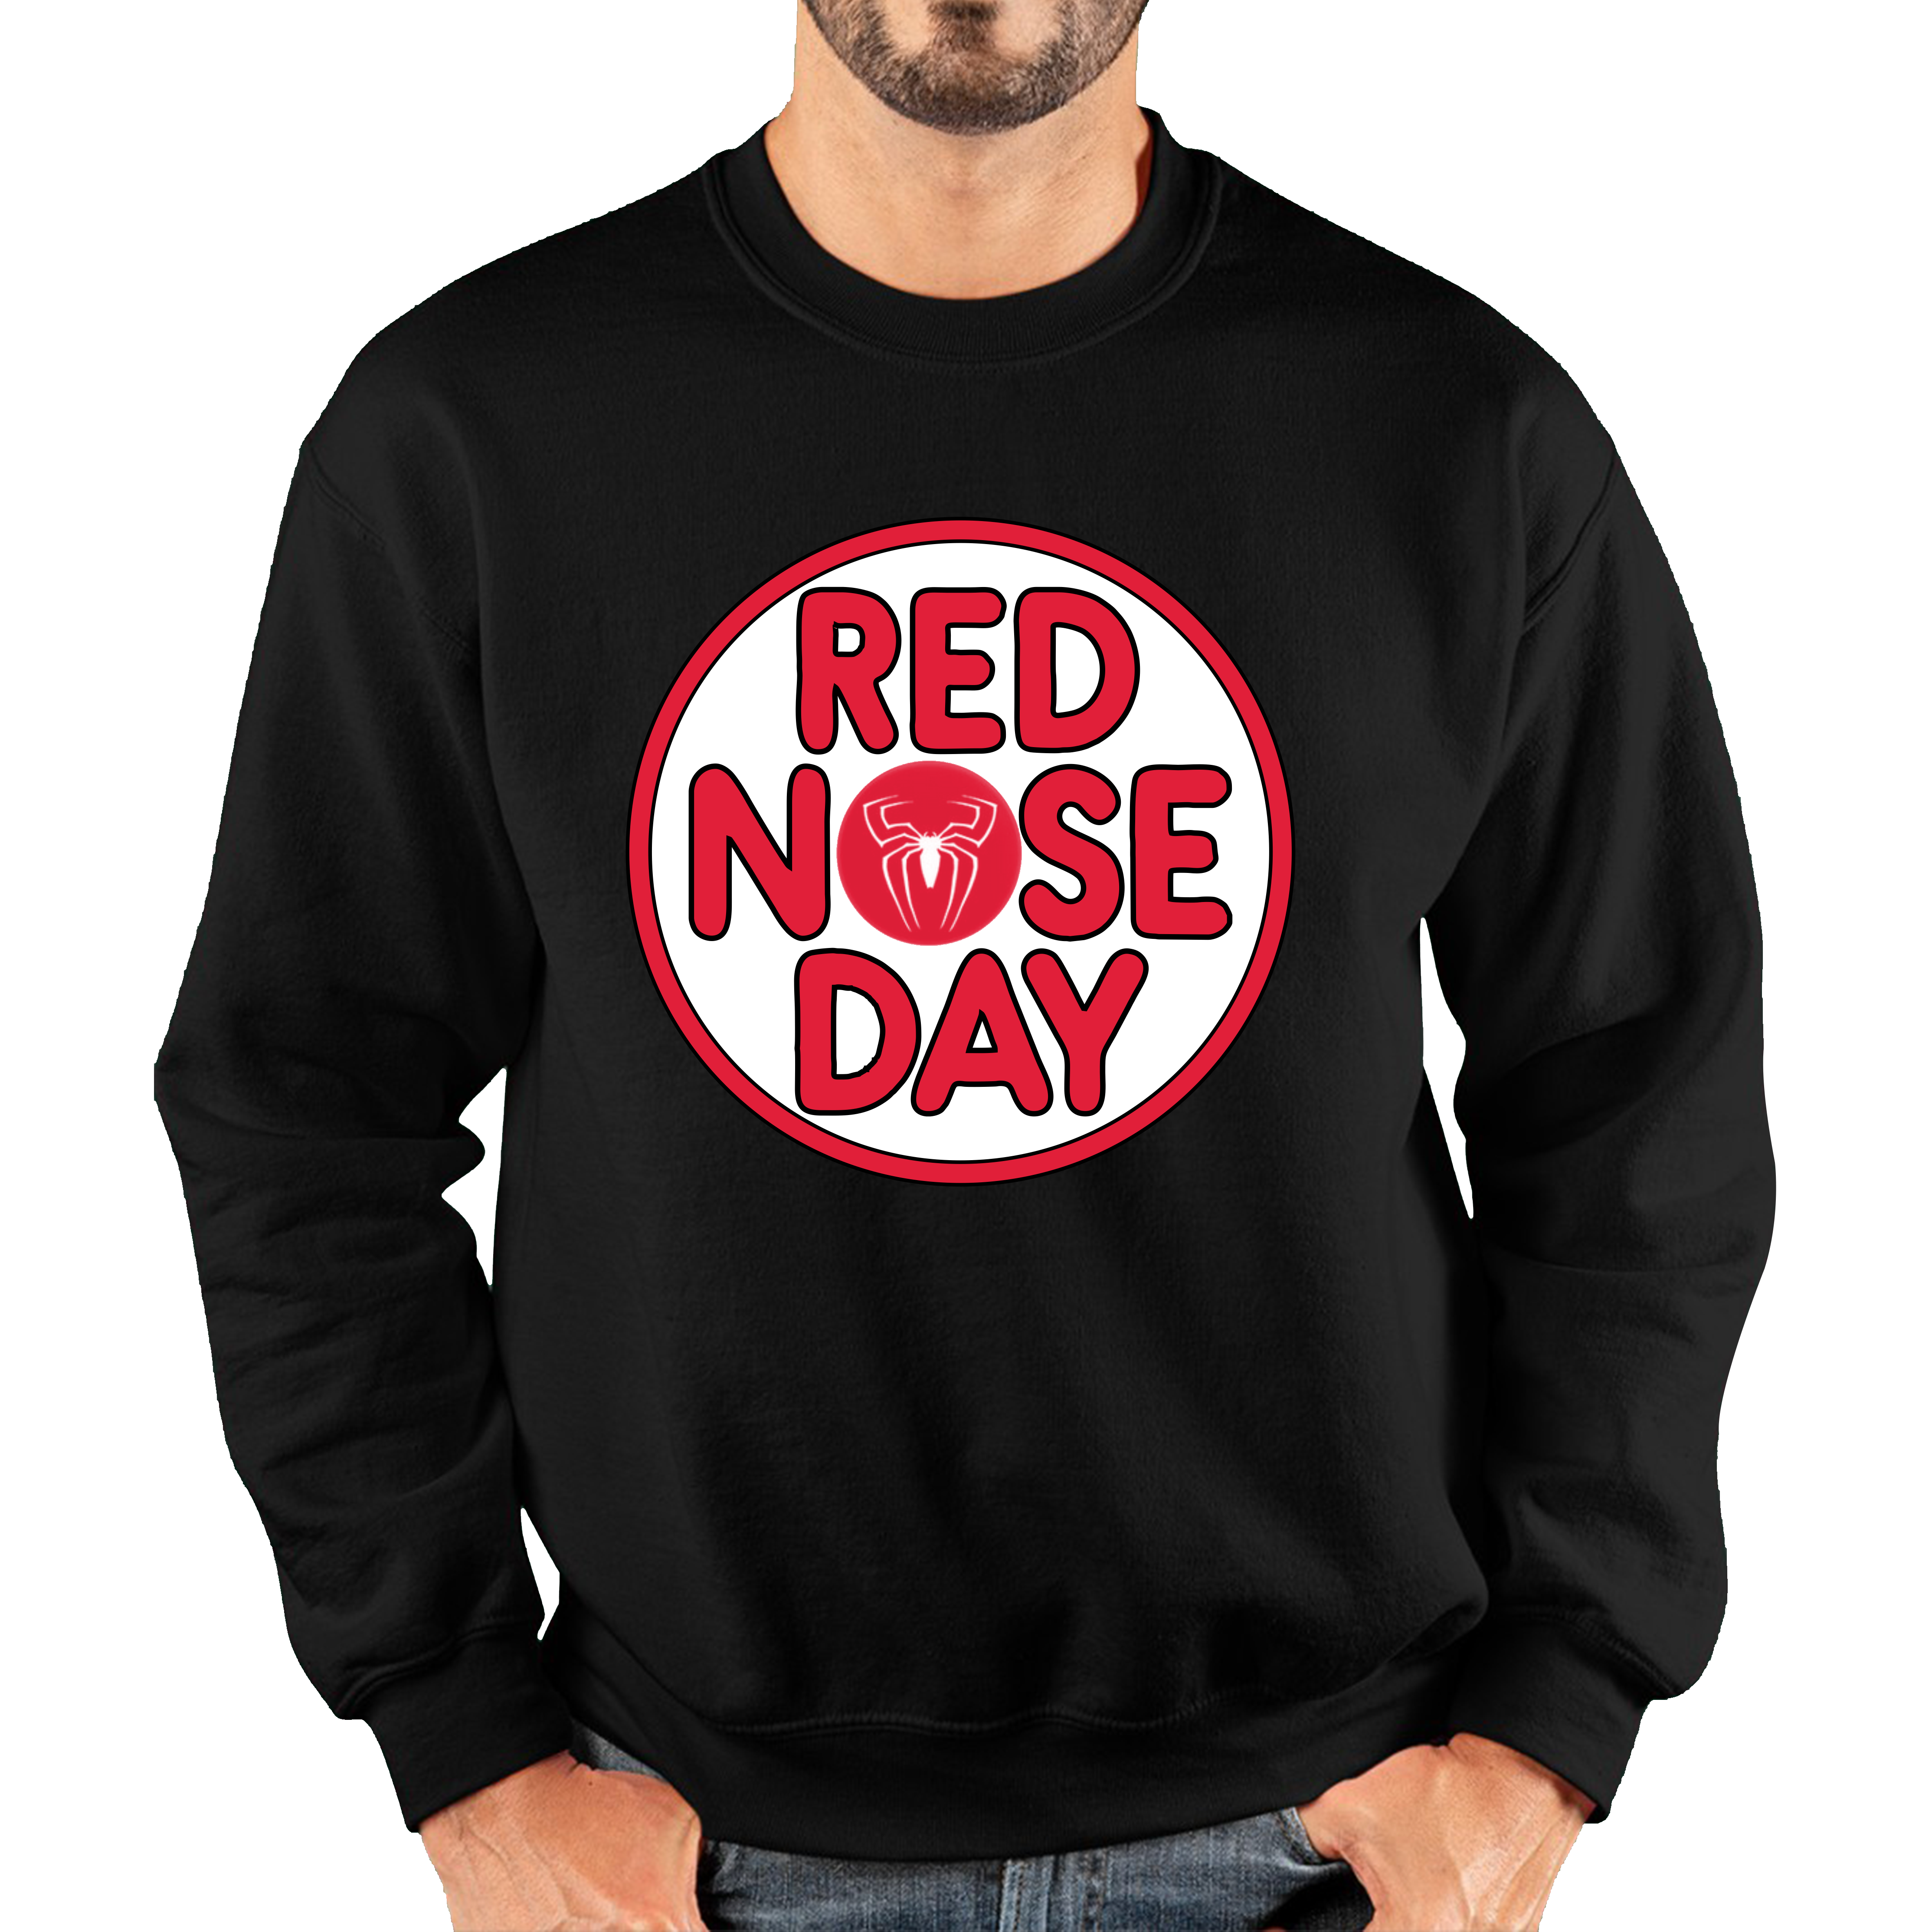 Spider Man Red Nose Day Adult Sweatshirt. 50% Goes To Charity